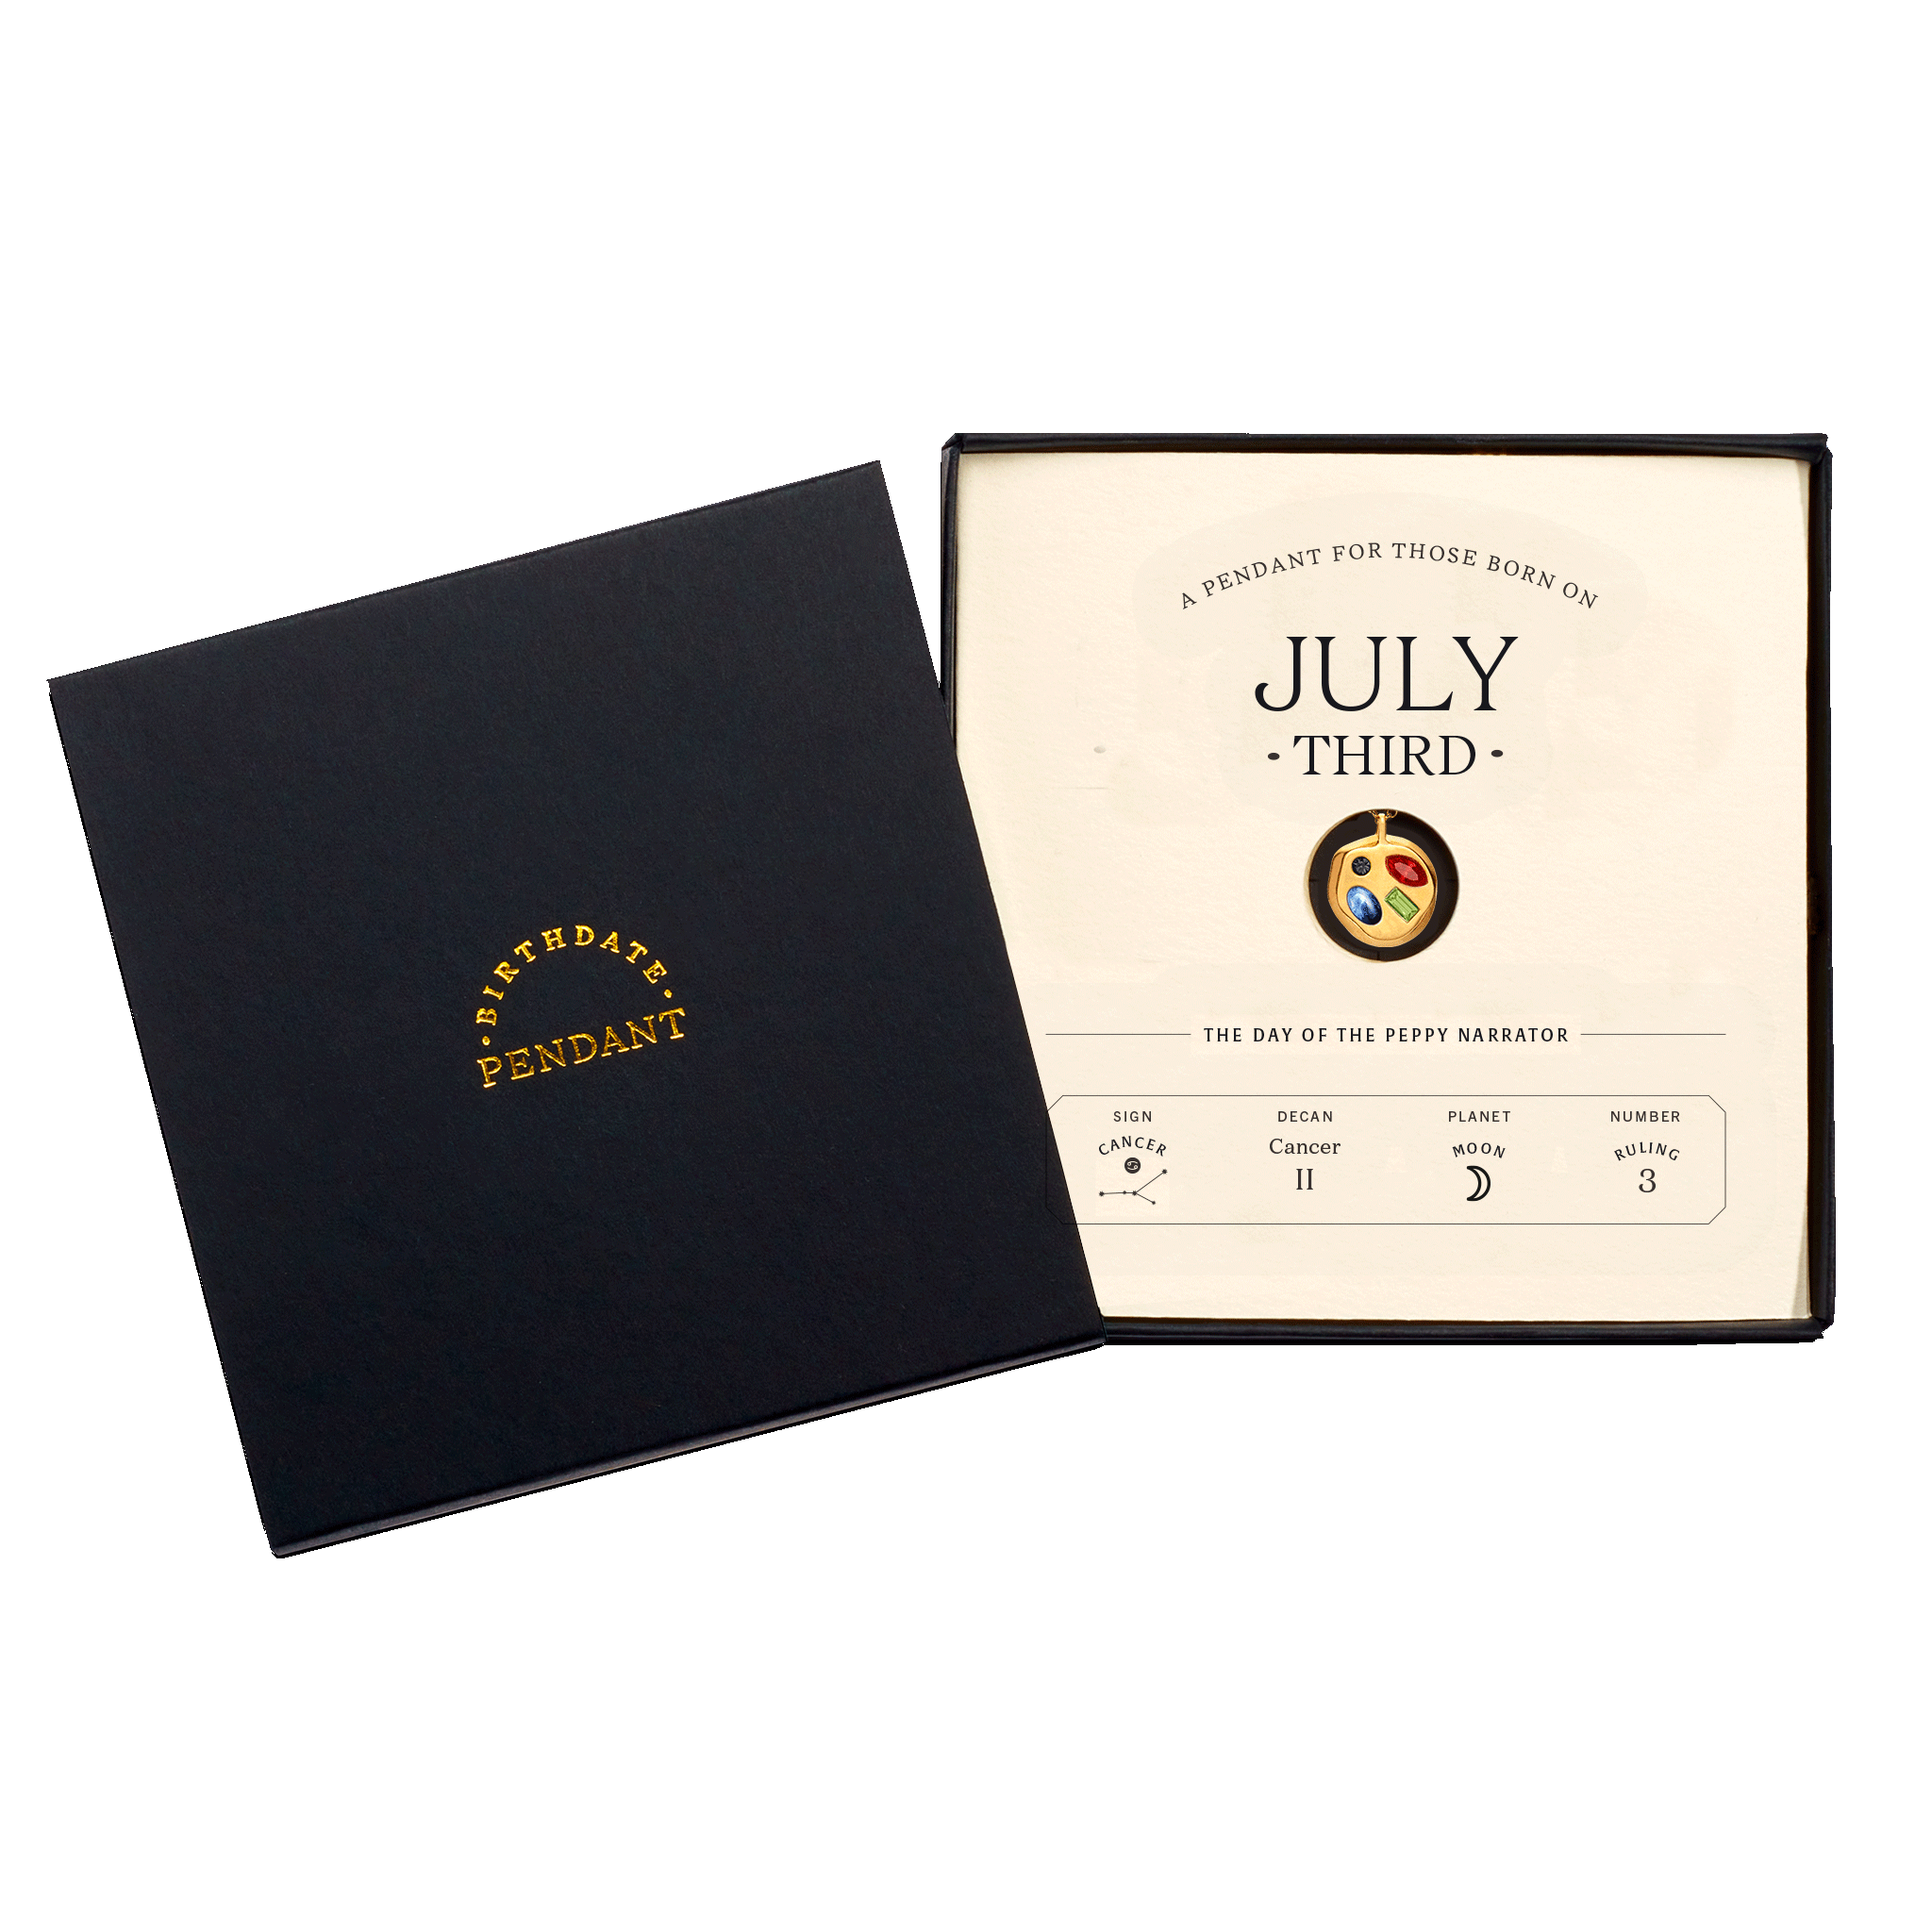 The July Third Pendant inside its box